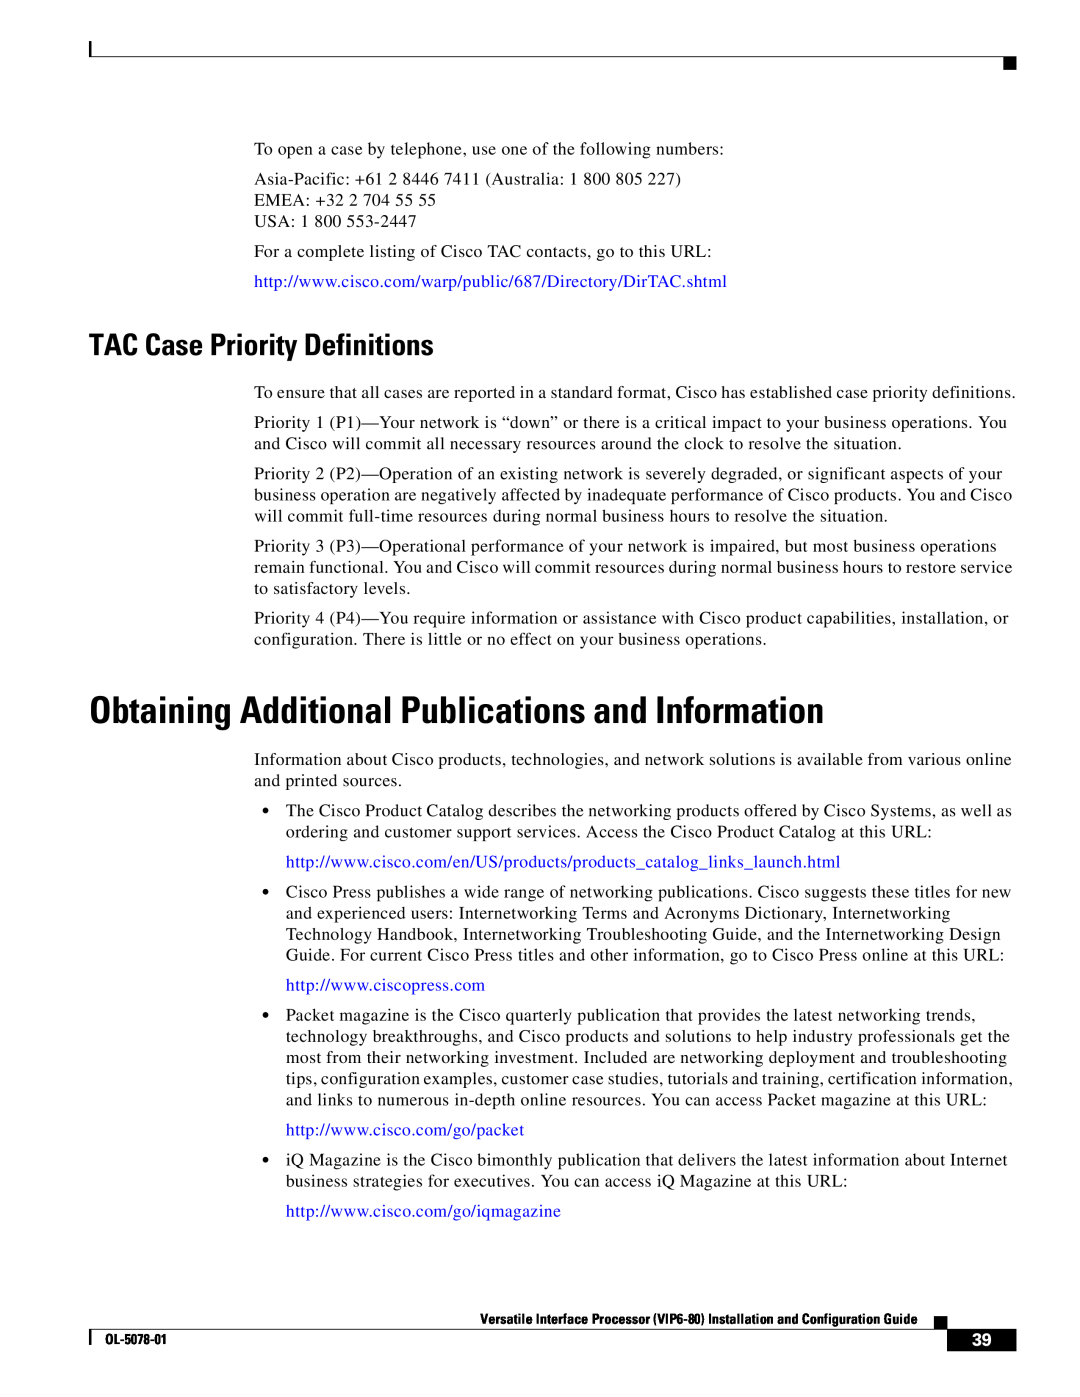 Cisco Systems (VIP6-80) manual Obtaining Additional Publications and Information, TAC Case Priority Definitions 